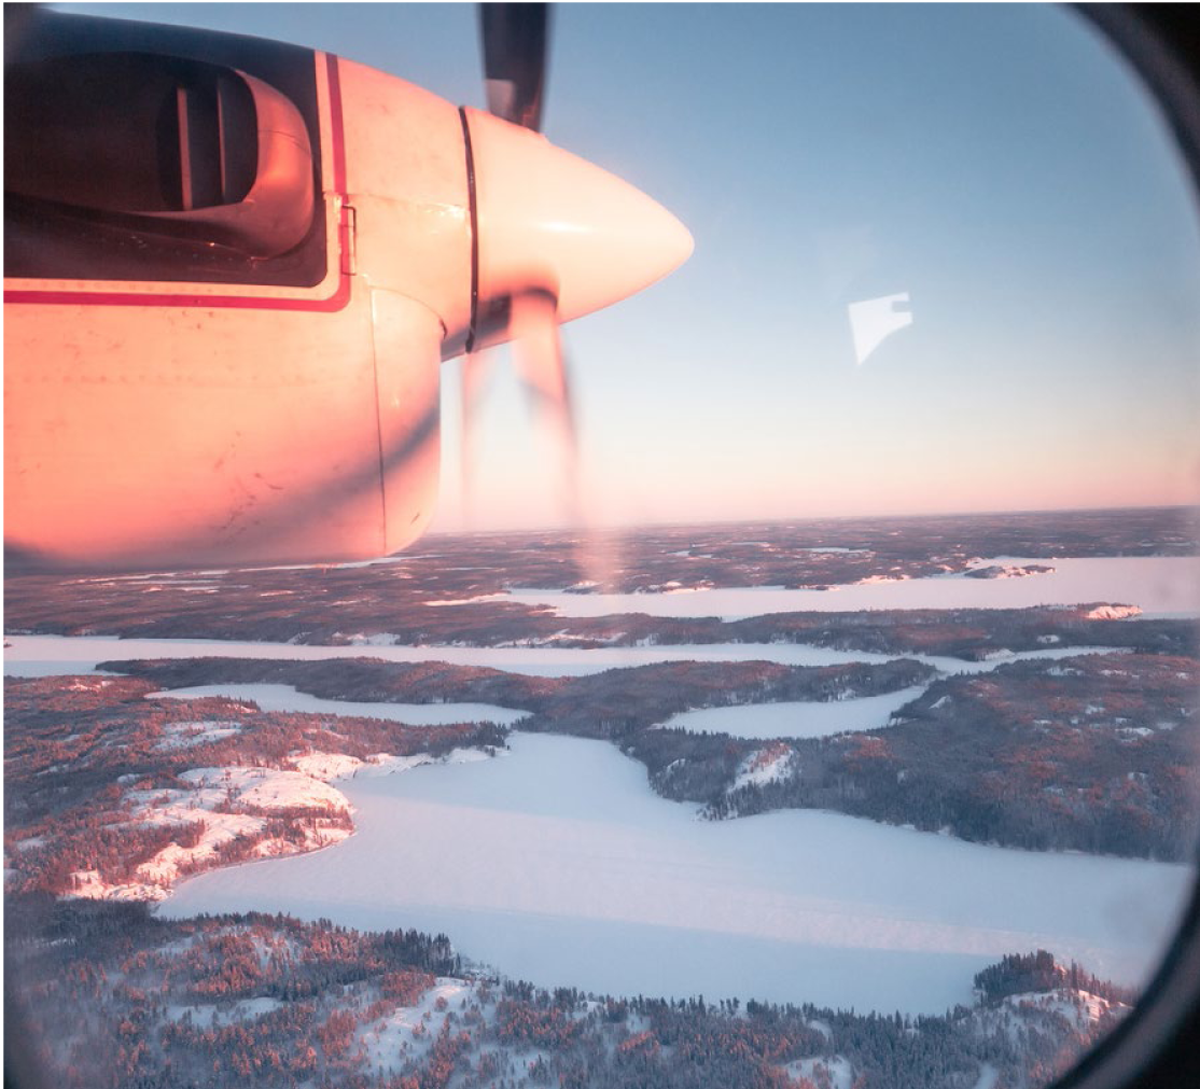 View of winter landscape in Yellowknife from an aircraft